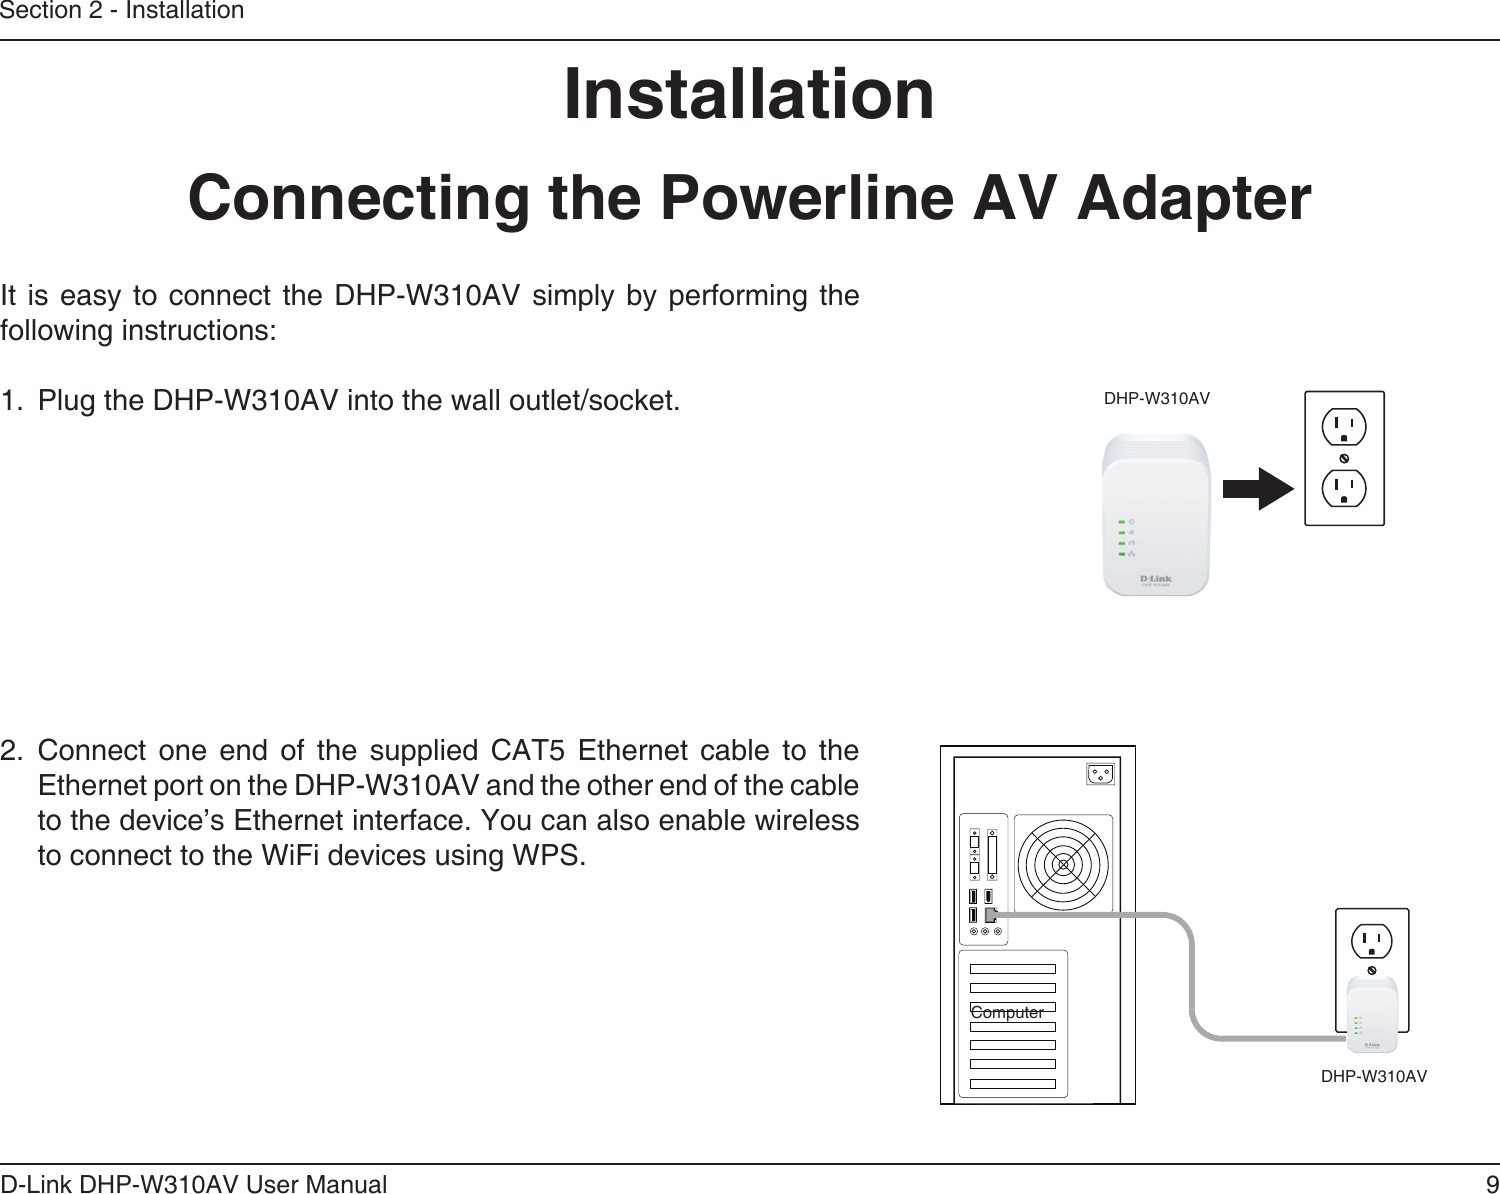 9D-Link DHP-W310AV User ManualSection 2 - InstallationInstallationConnecting the Powerline AV AdapterIt is easy  to connect the  DHP-W310AV  simply  by performing the following instructions:1.  Plug the DHP-W310AV into the wall outlet/socket.         2.  Connect  one  end  of  the  supplied  CAT5  Ethernet  cable  to  the Ethernet port on the DHP-W310AV and the other end of the cable to the device’s Ethernet interface. You can also enable wireless to connect to the WiFi devices using WPS.DHP-W310AVDHP-W310AVComputer